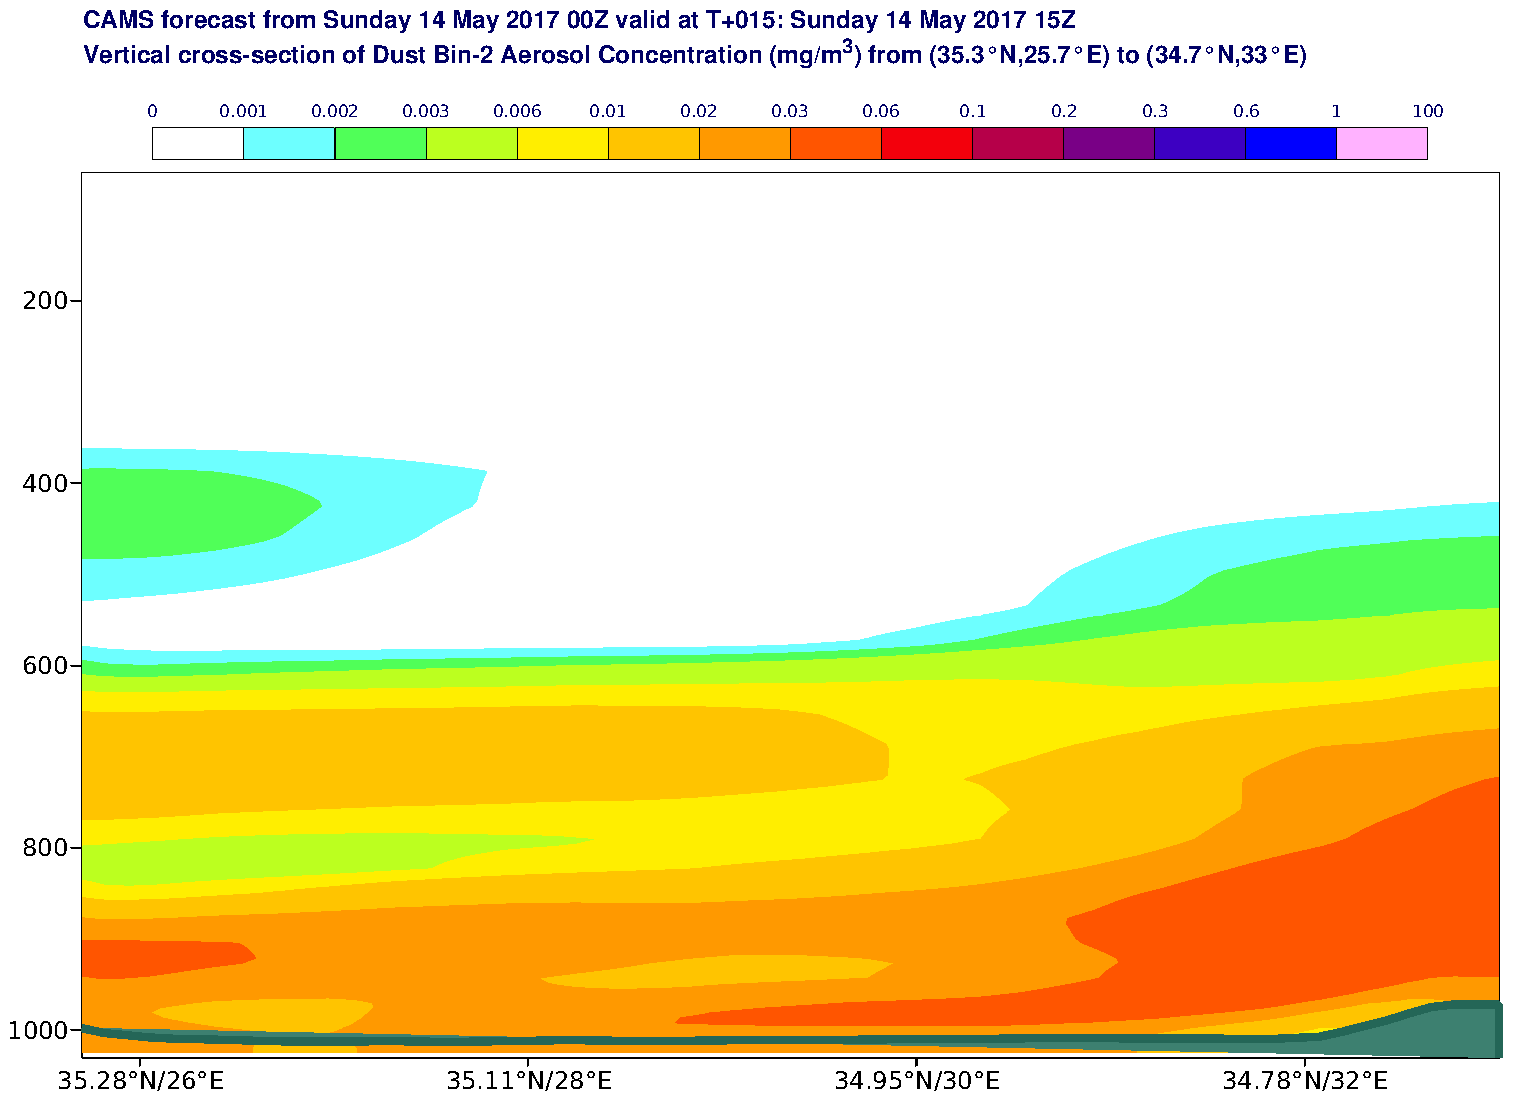 Vertical cross-section of Dust Bin-2 Aerosol Concentration (mg/m3) valid at T15 - 2017-05-14 15:00